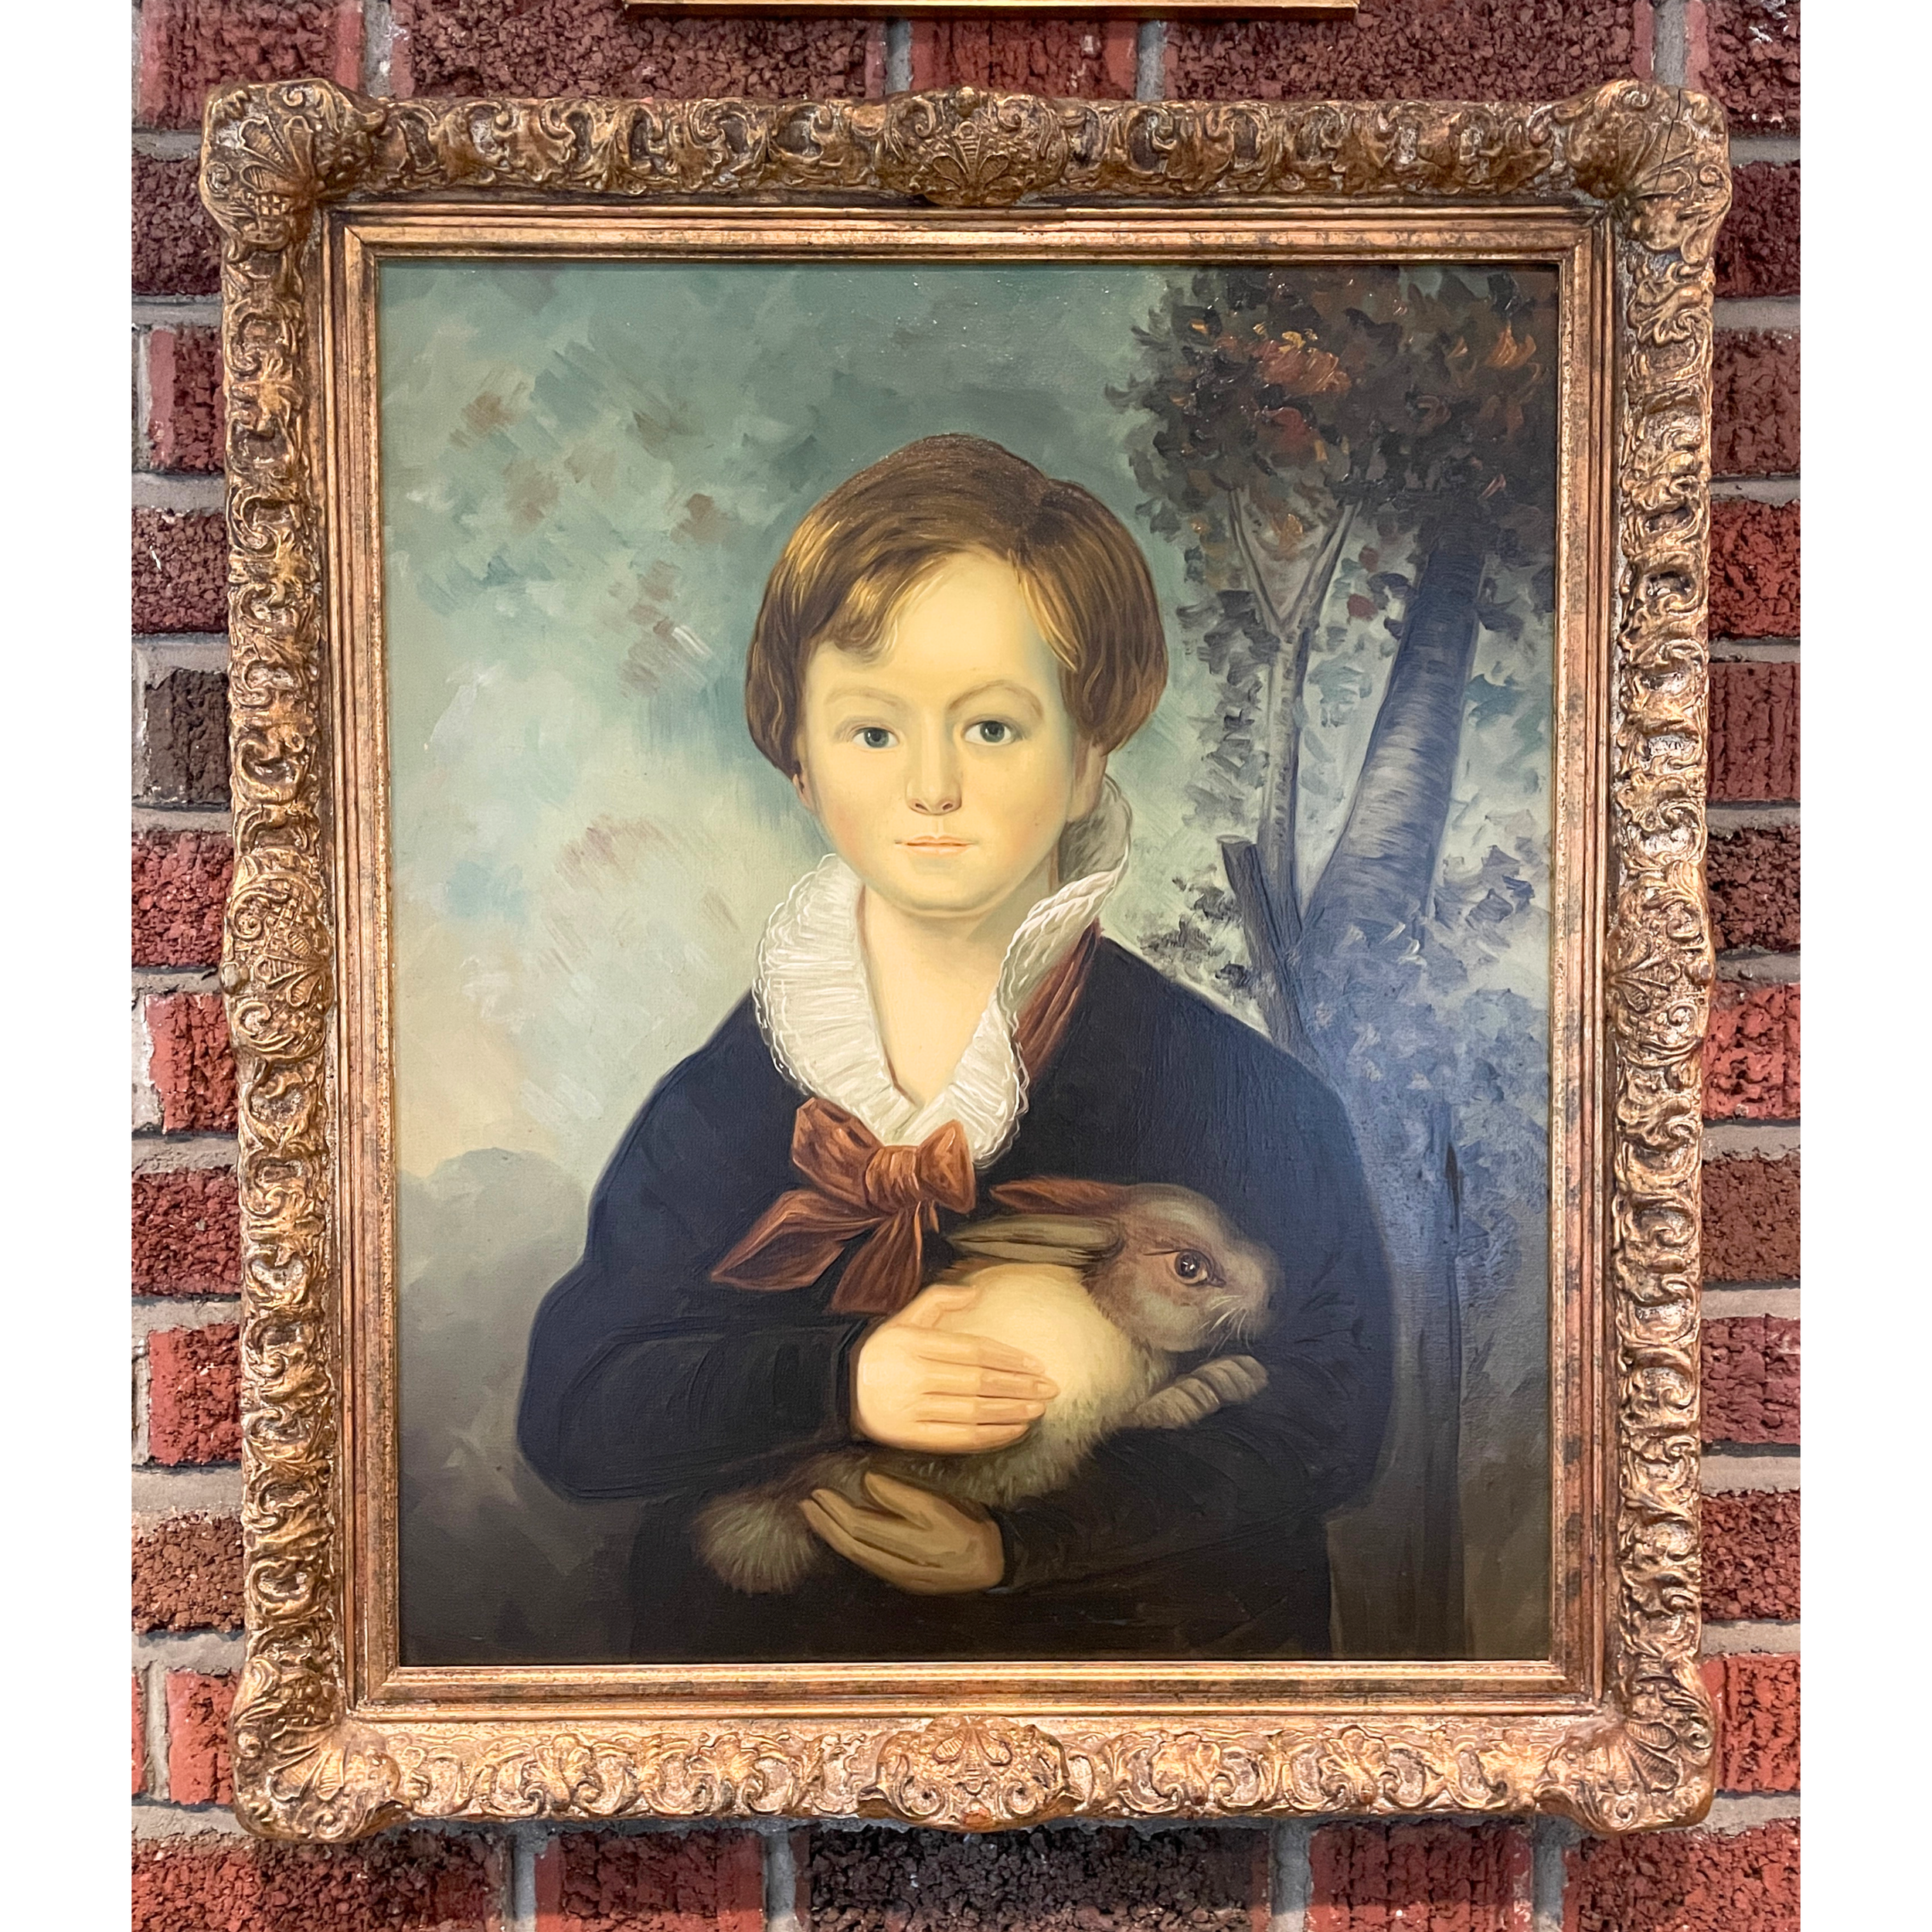 Framed Copy of "Boy with Rabbit" from Master Tennyson Chelsea House Painting